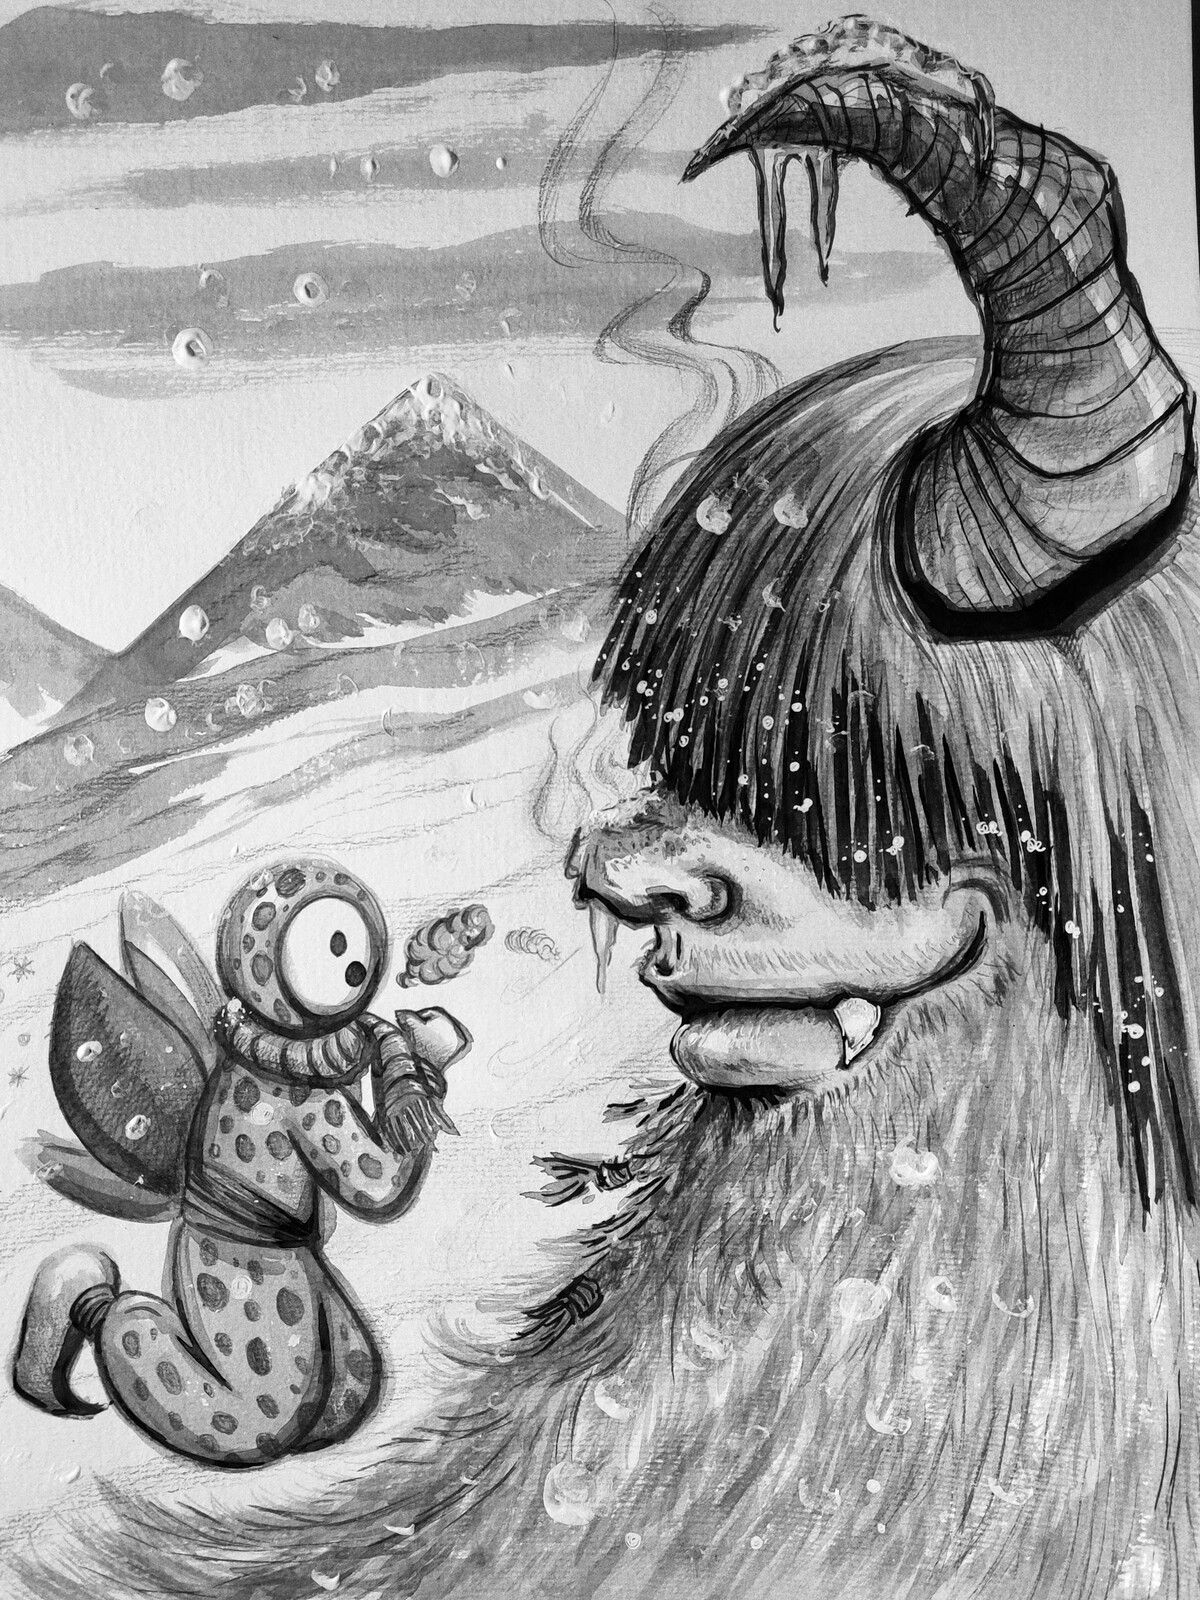 Deep in the snowy mountains Magical Fairy Polka-dot Onesie Guy flew to find a mythical creature,
known to many as the Yeti. He stumbled upon this chilly fella during a snowstorm and asked if he knew of
the whereabouts of the Yeti.